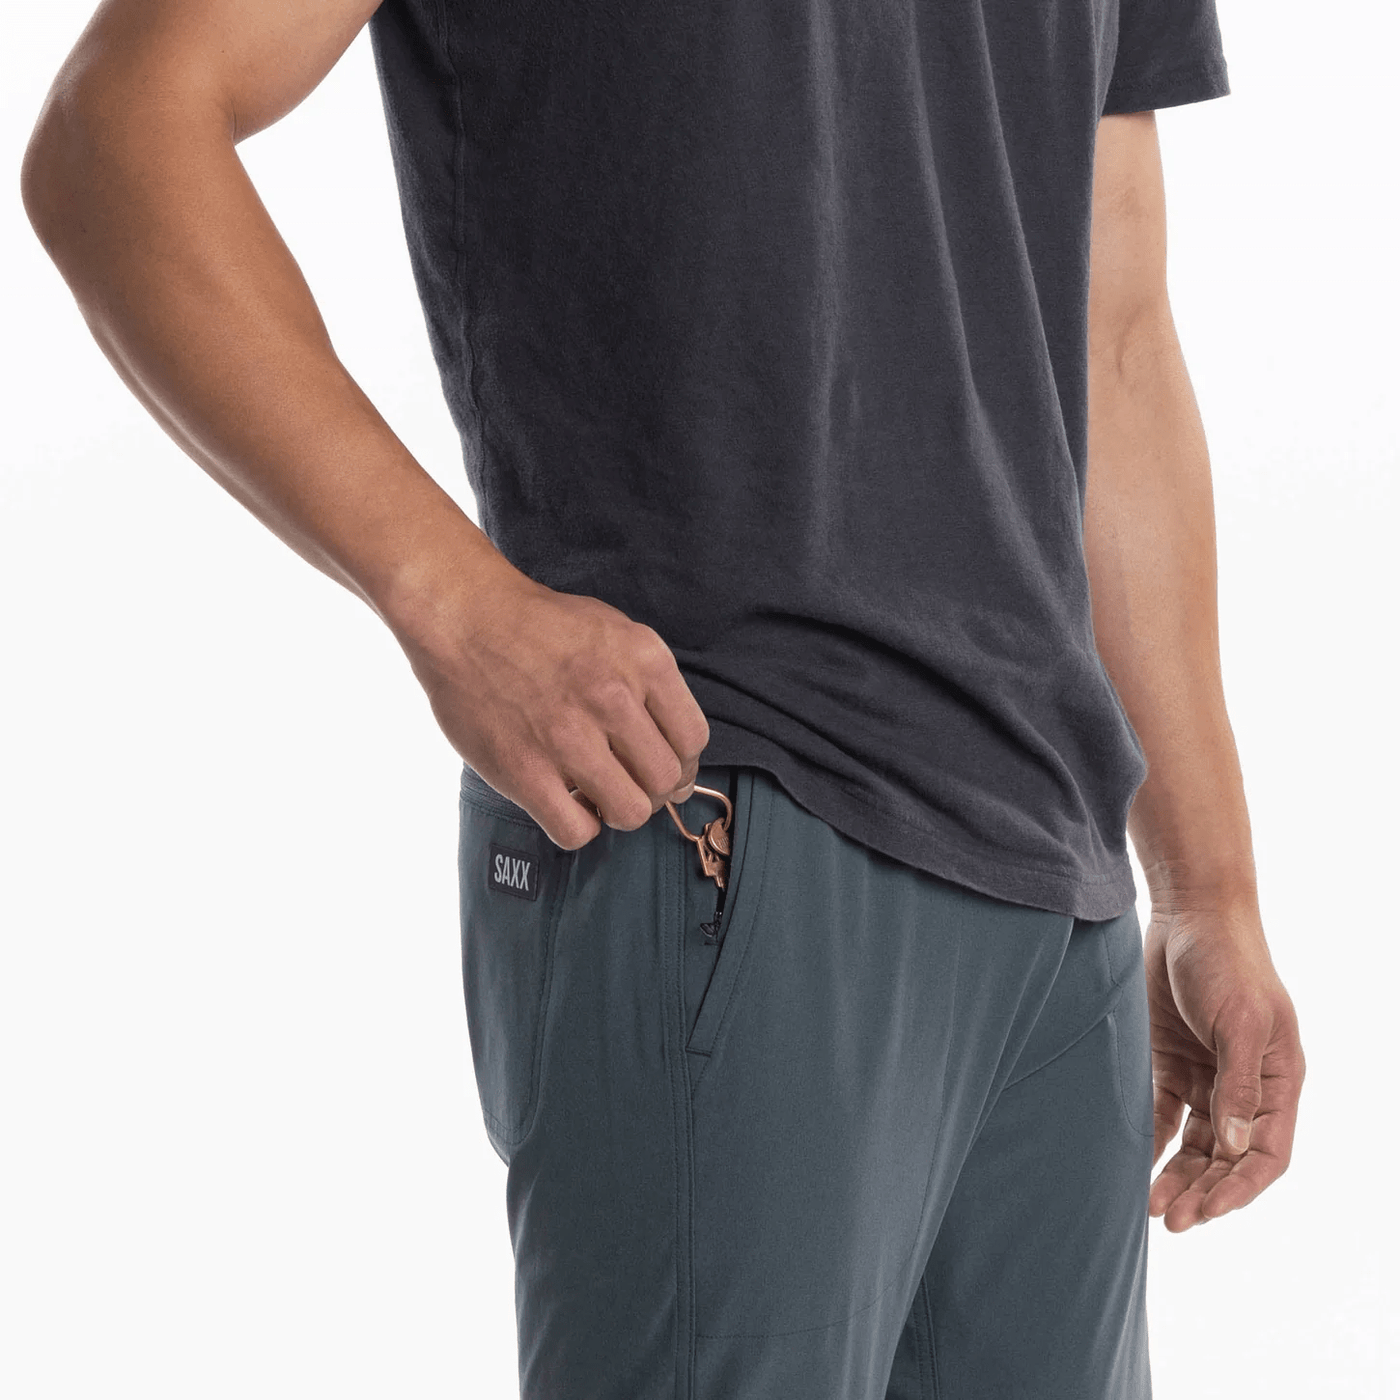 Saxx Go To Town Jogger Pants - Toasted Coconut